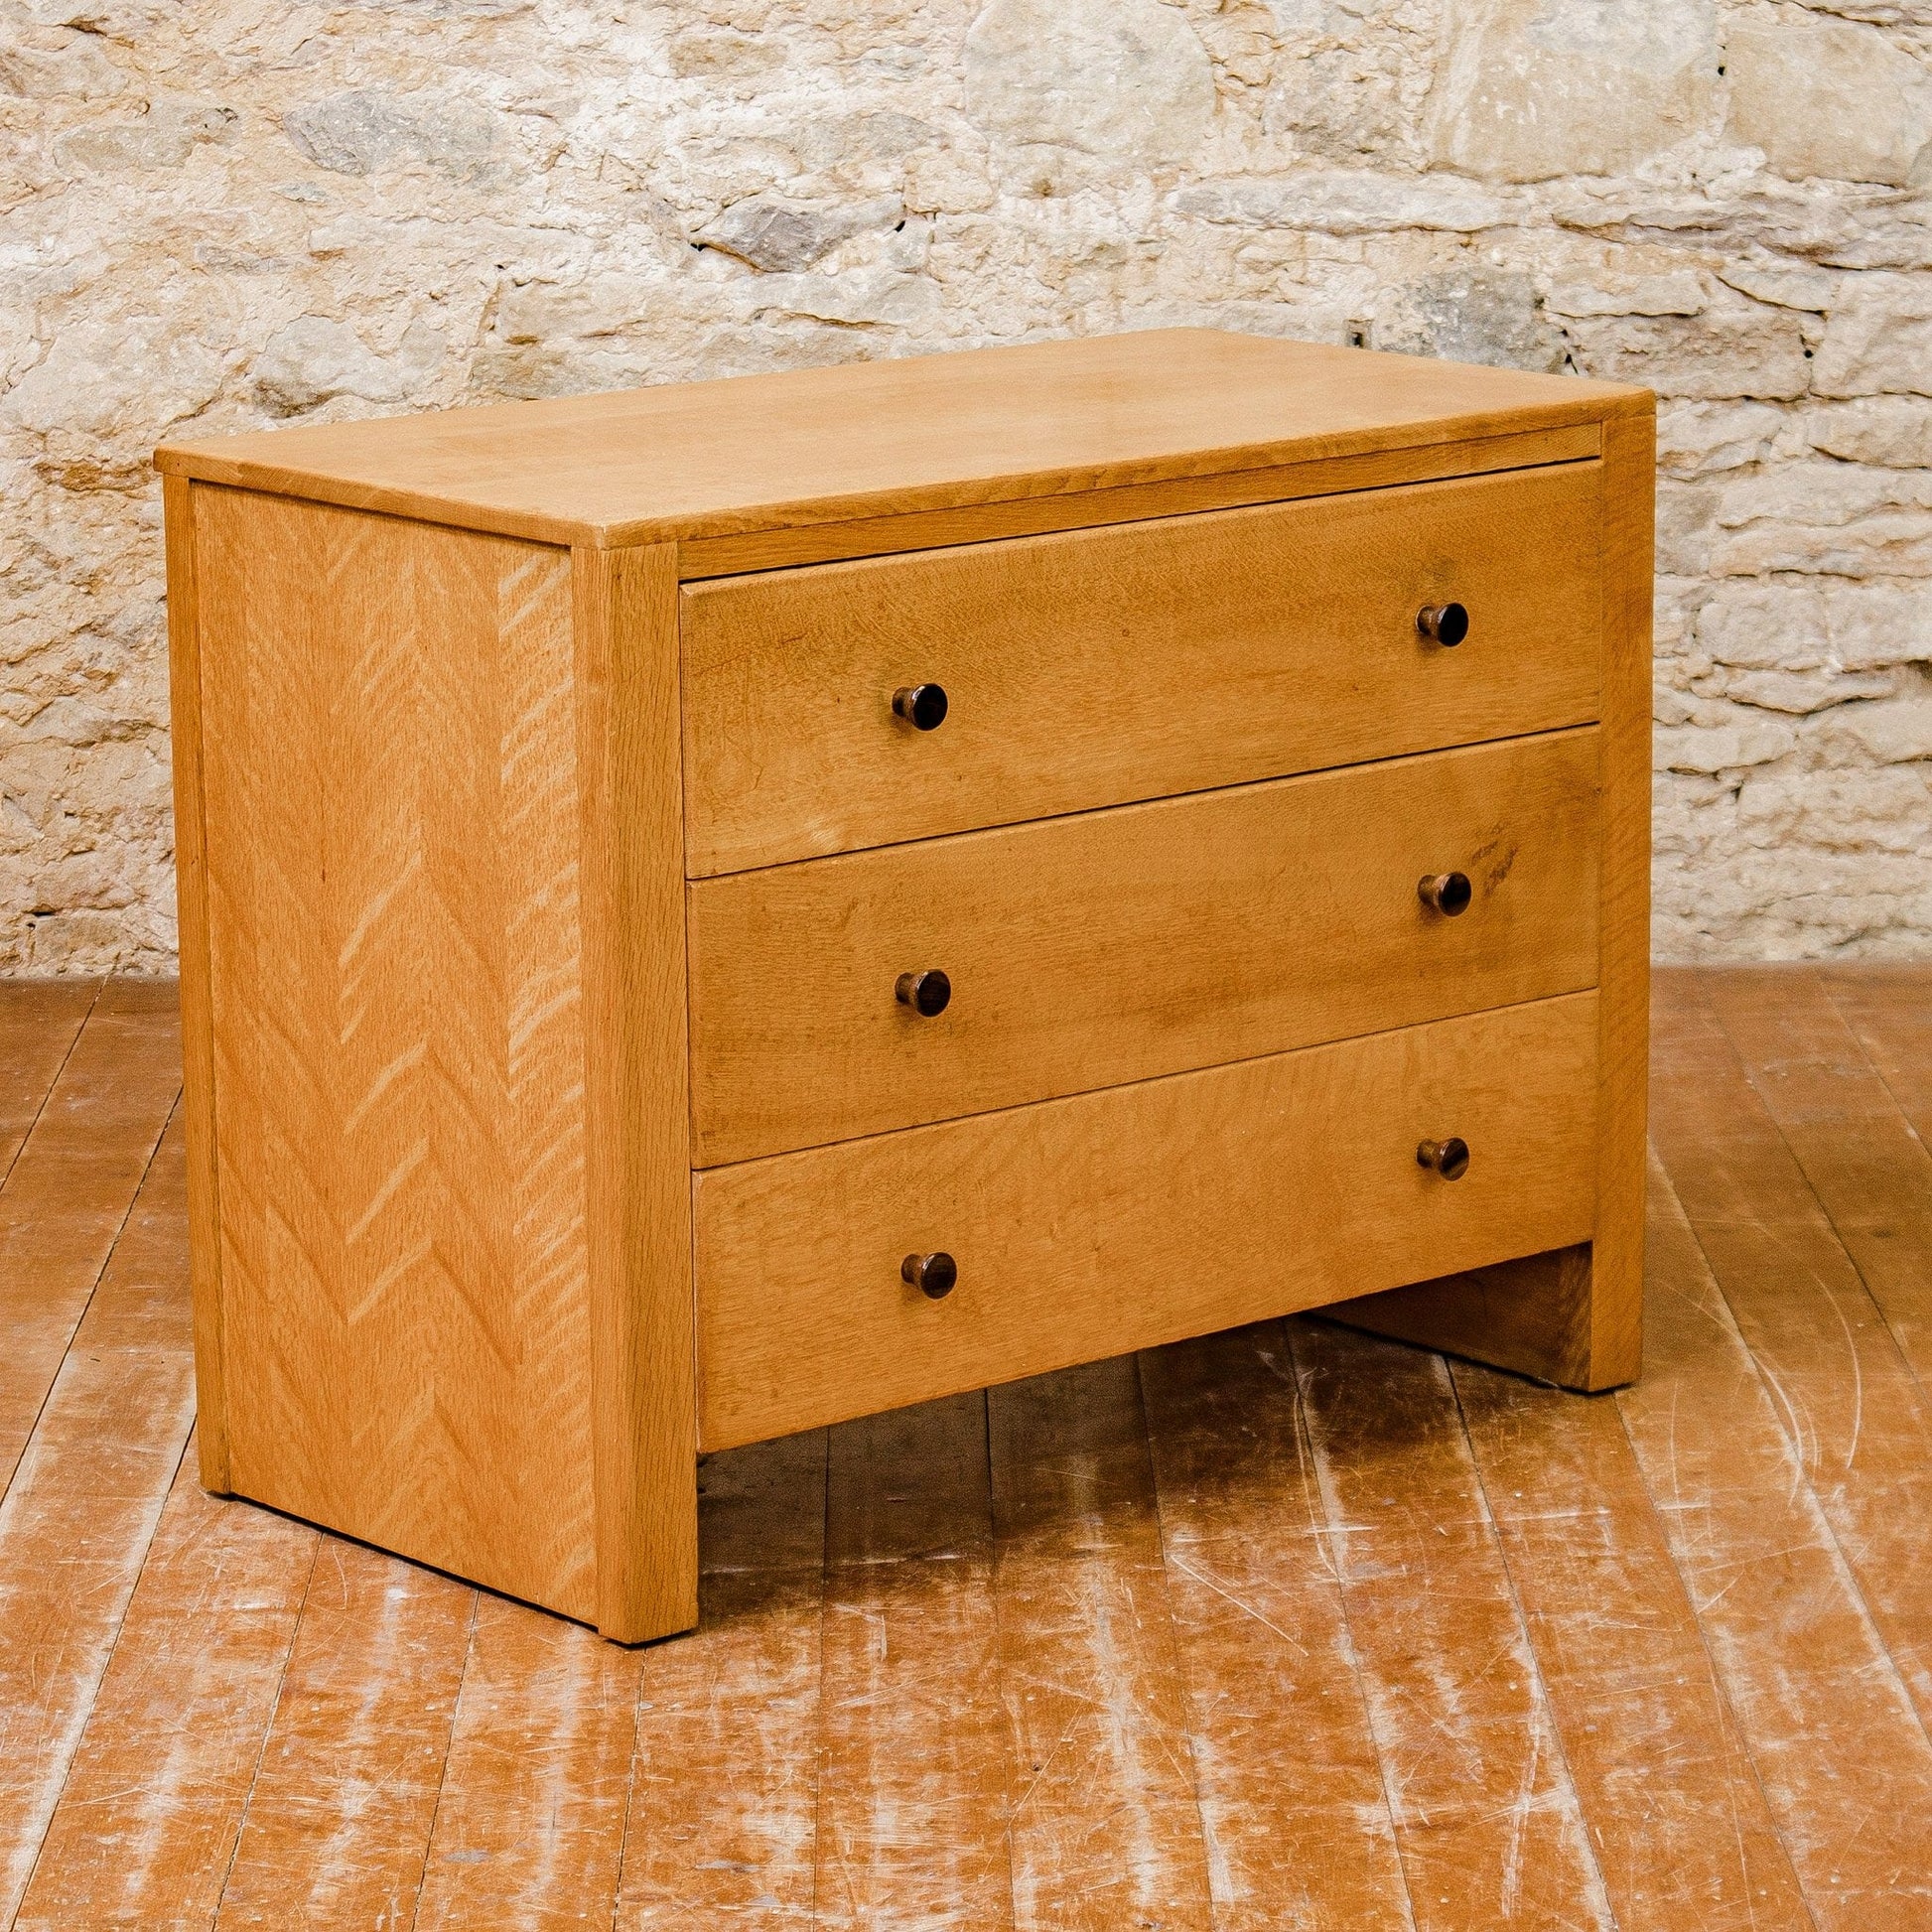 Gordon Russell Arts & Crafts Cotswold School English Oak Chest of Drawers c. 1935